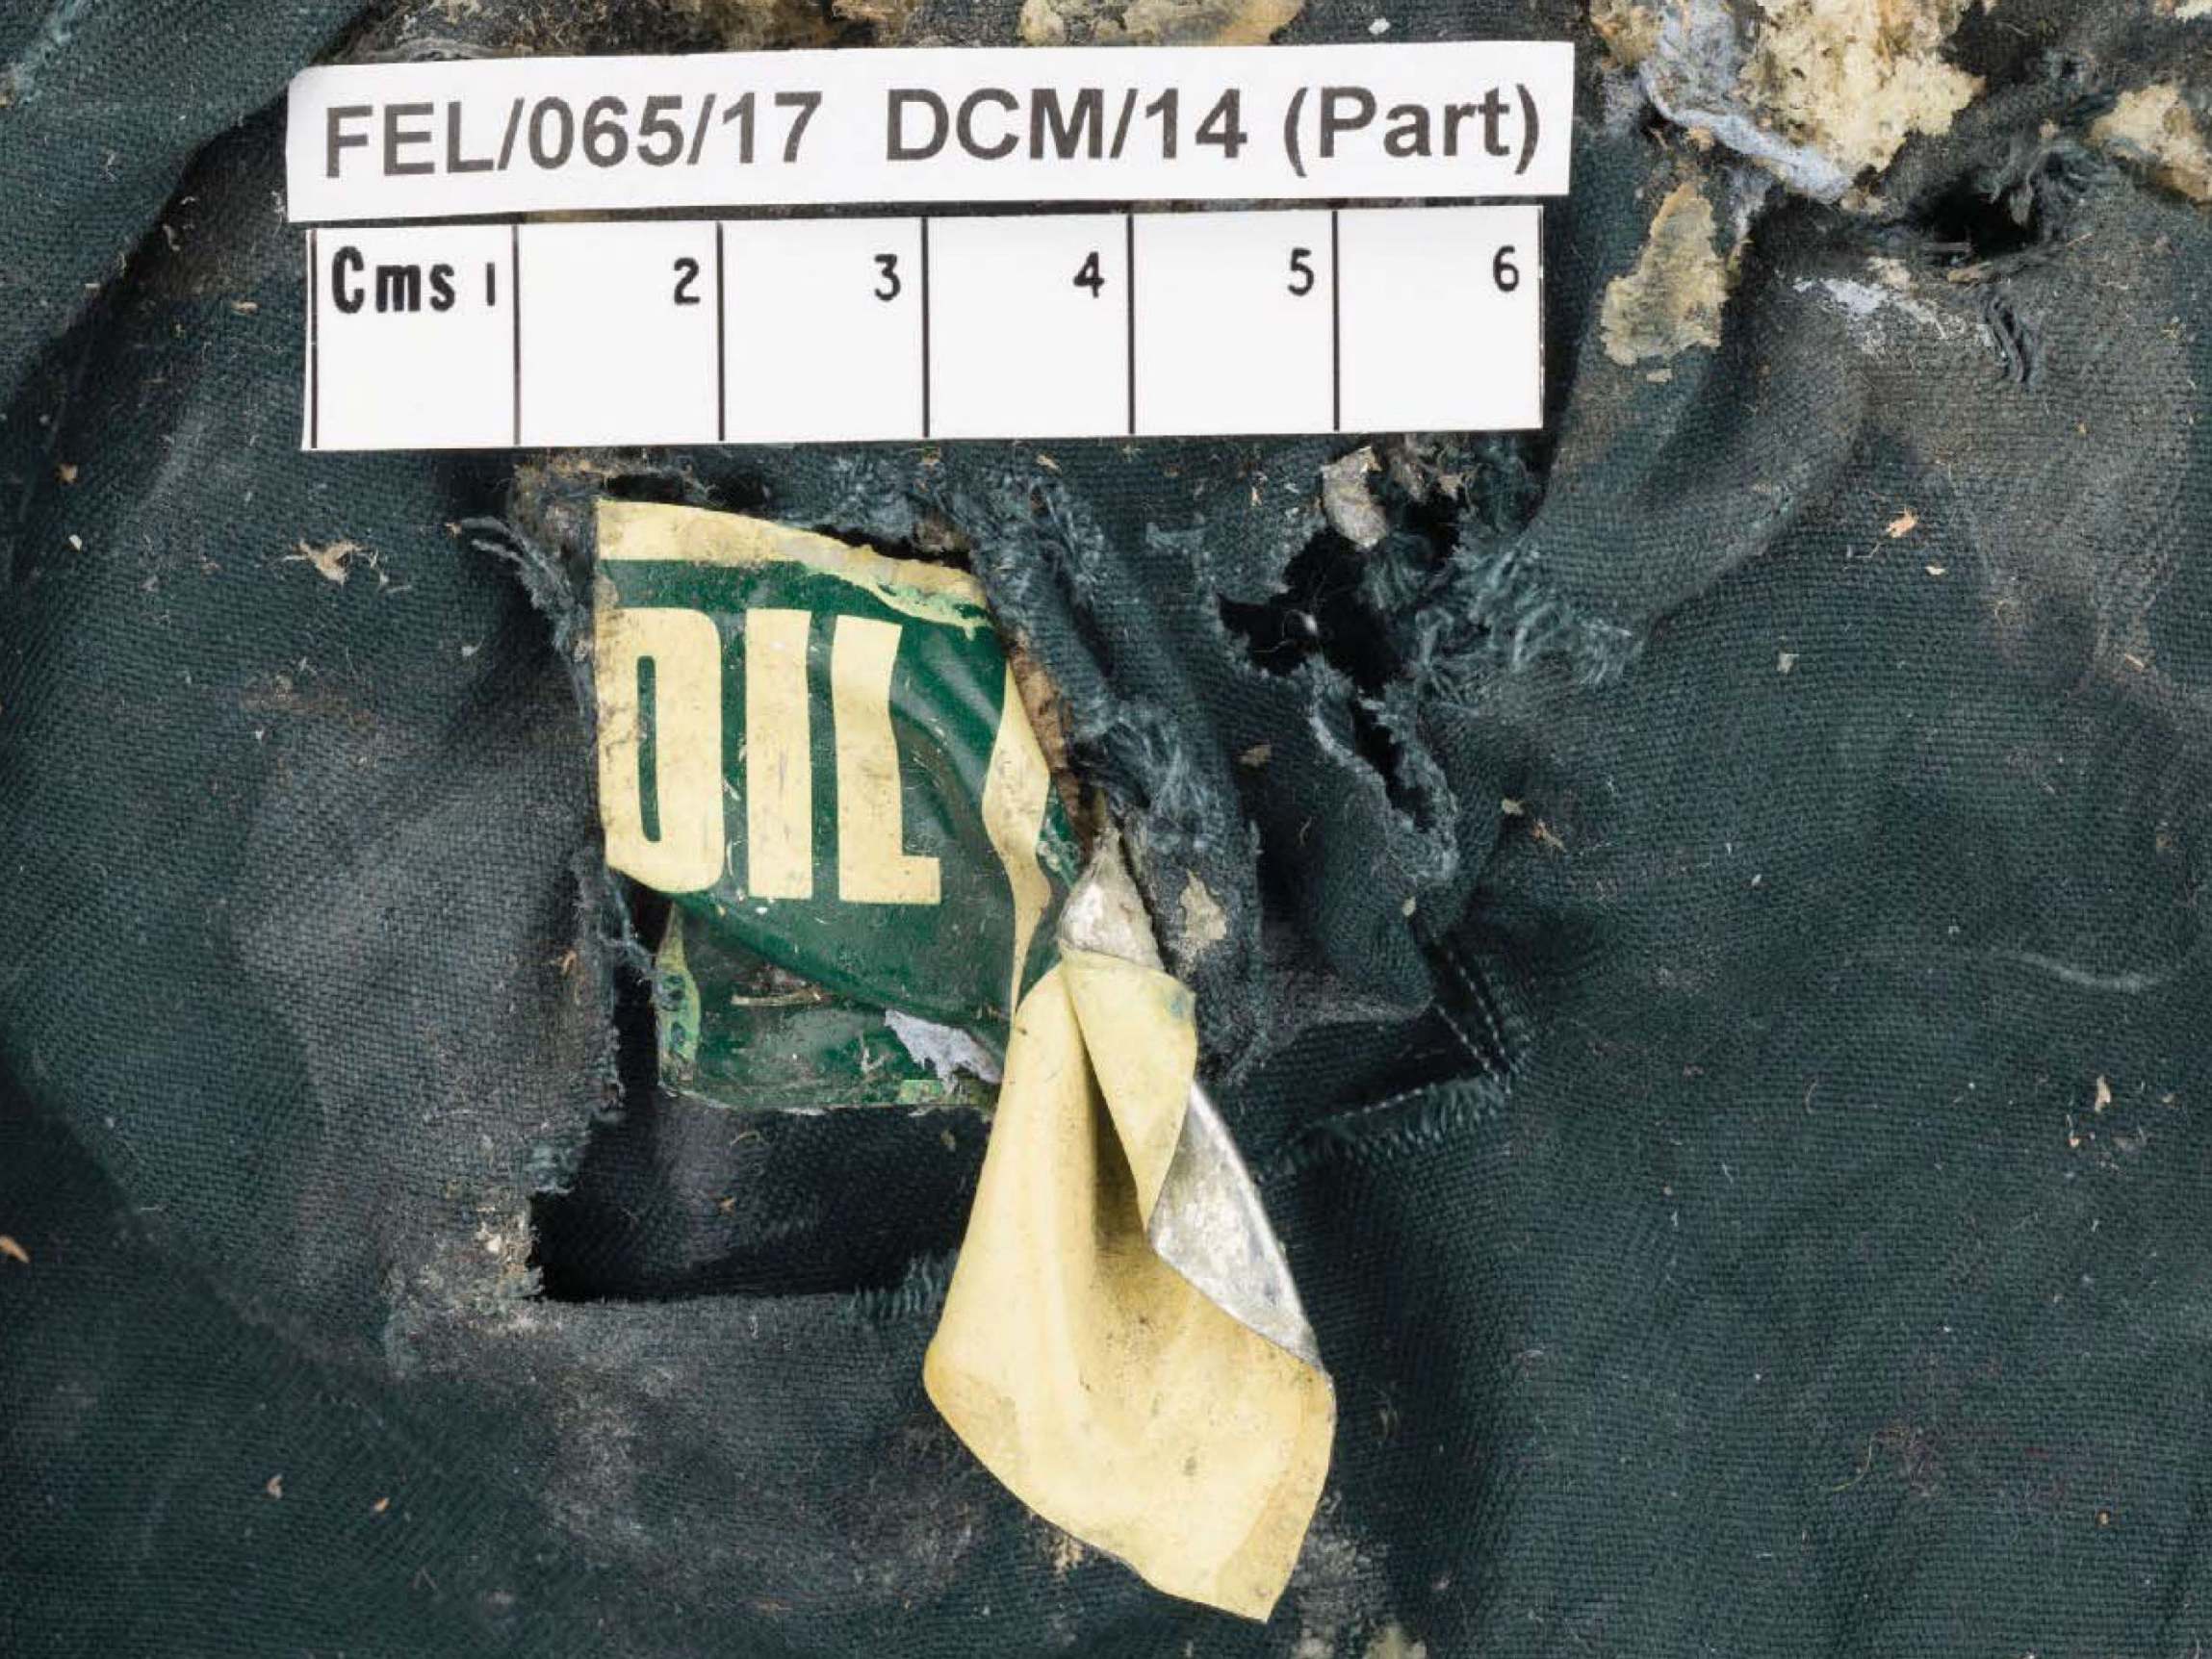 Part of a vegetable oil can that was recovered from the scene of the Manchester Arena bombing (Greater Manchester Police )